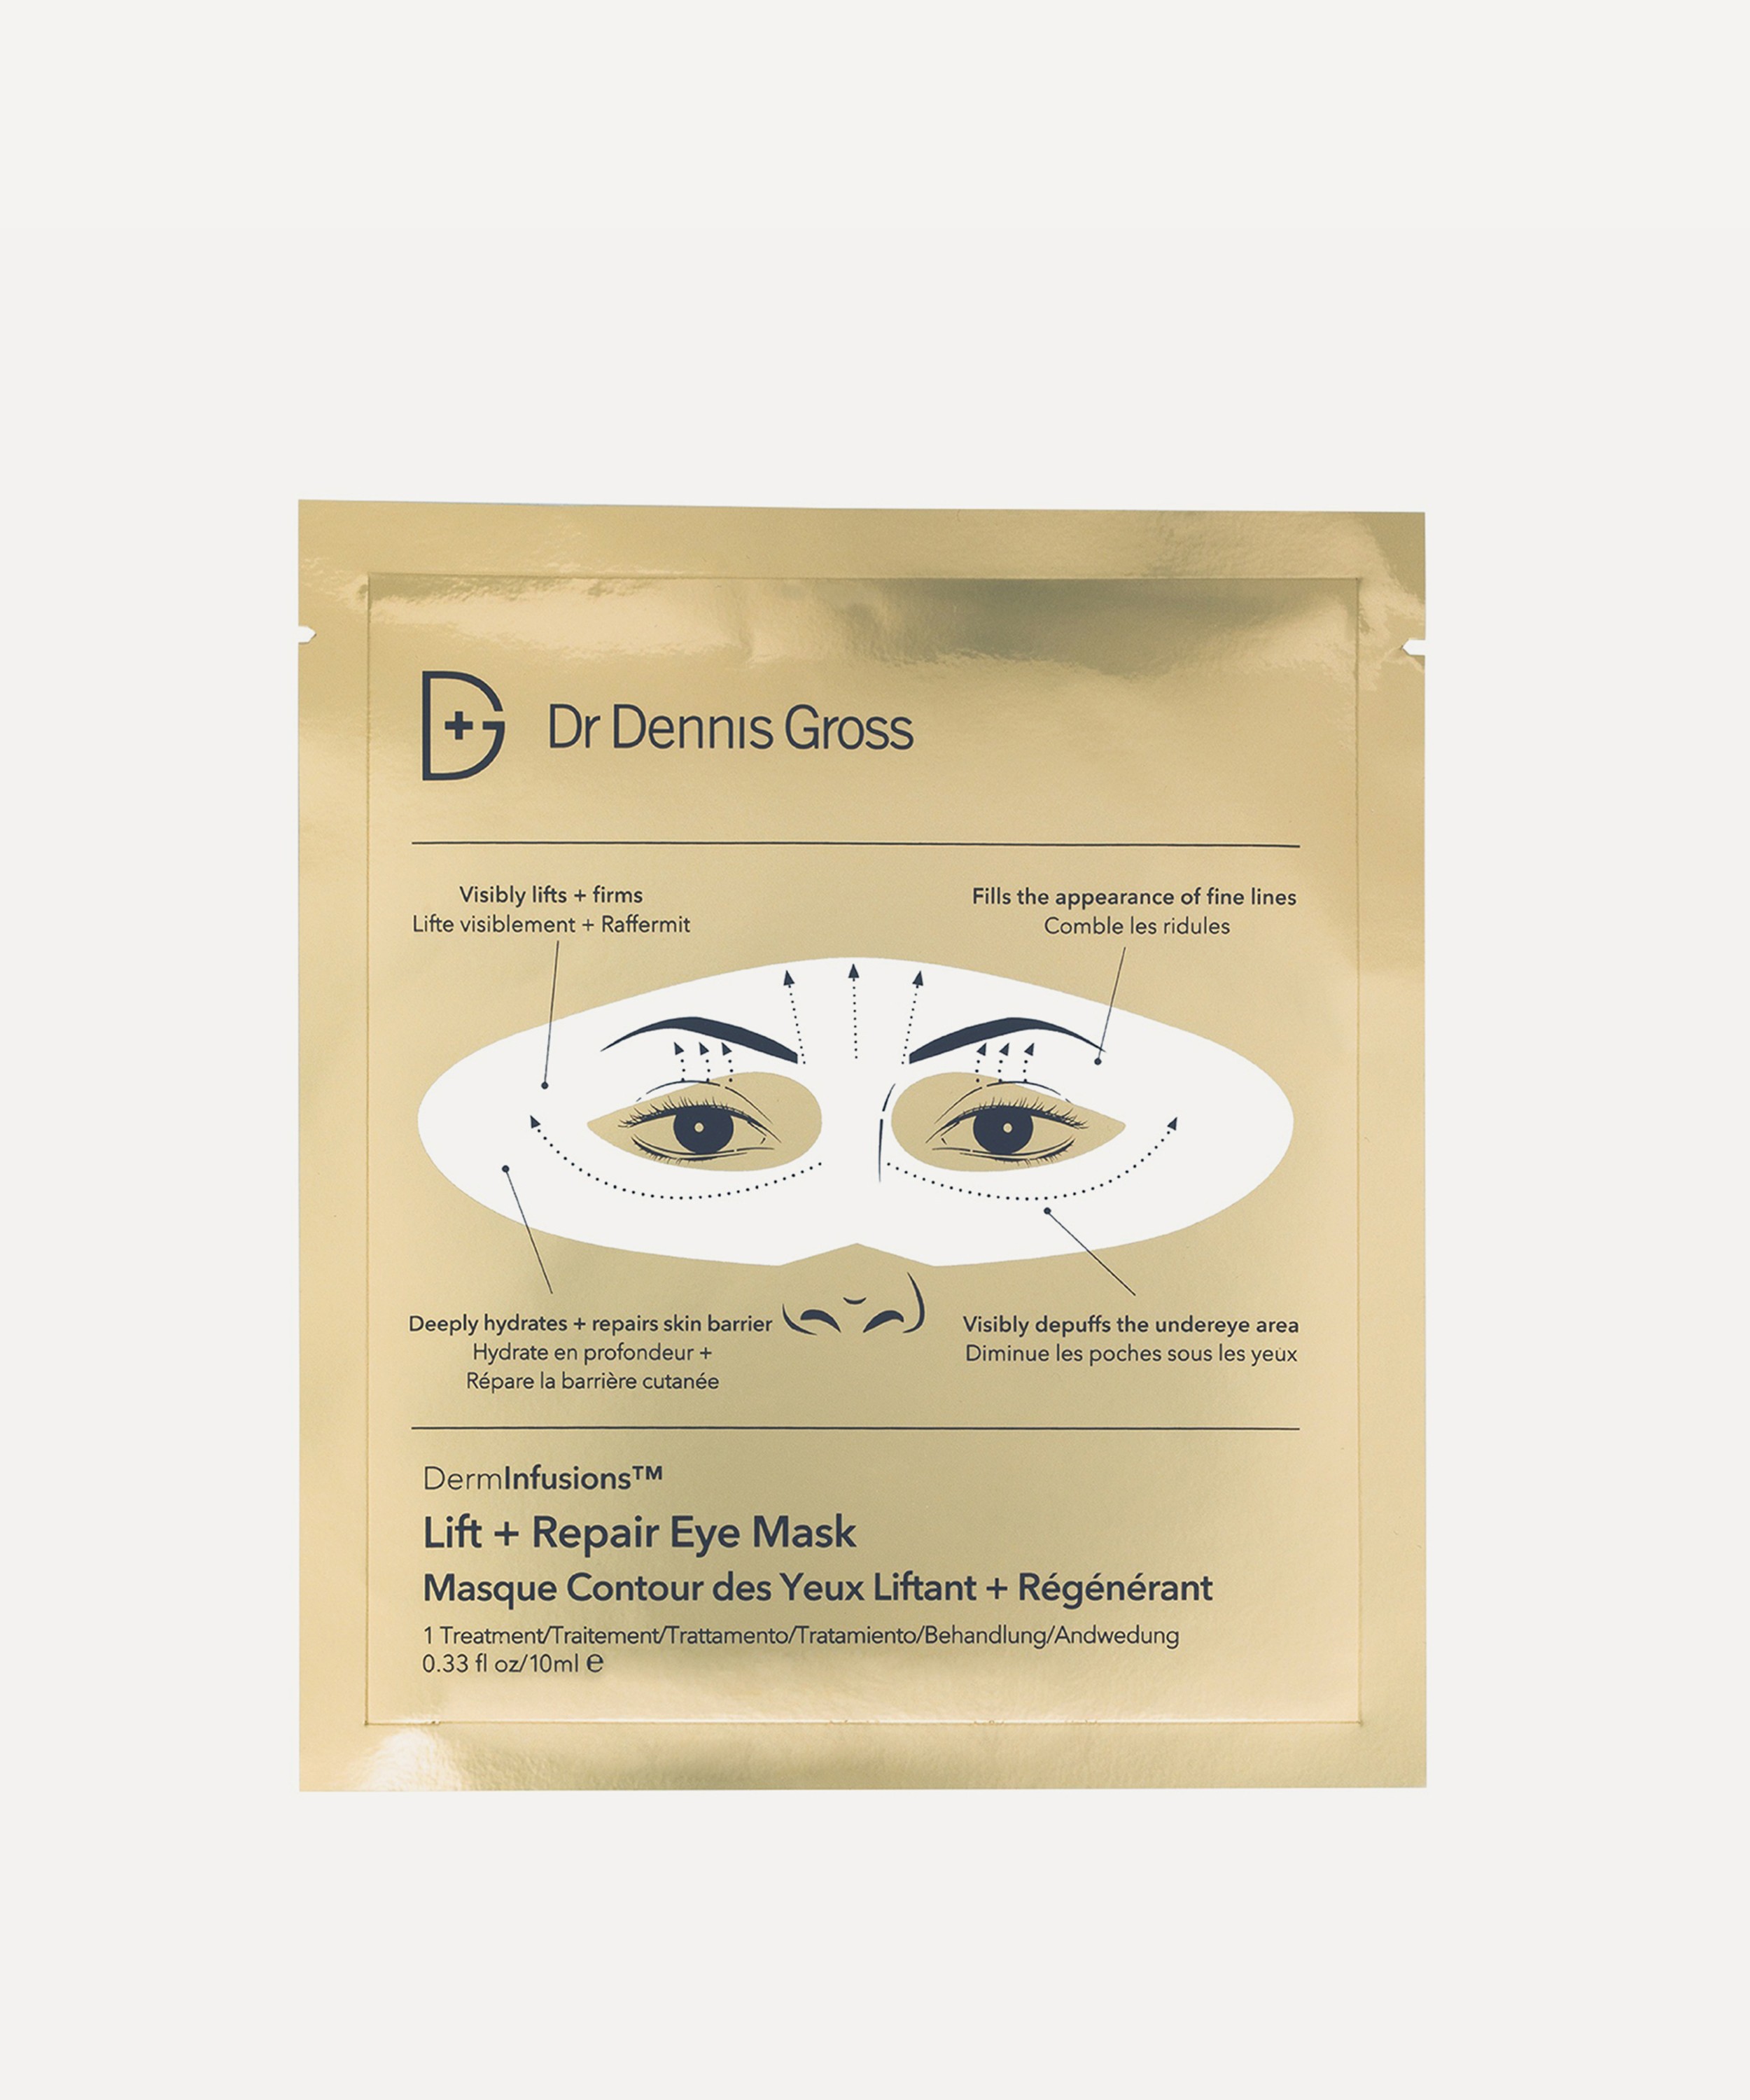 Dr. Dennis Gross Skincare - DermInfusions Lift and Repair Eye Mask